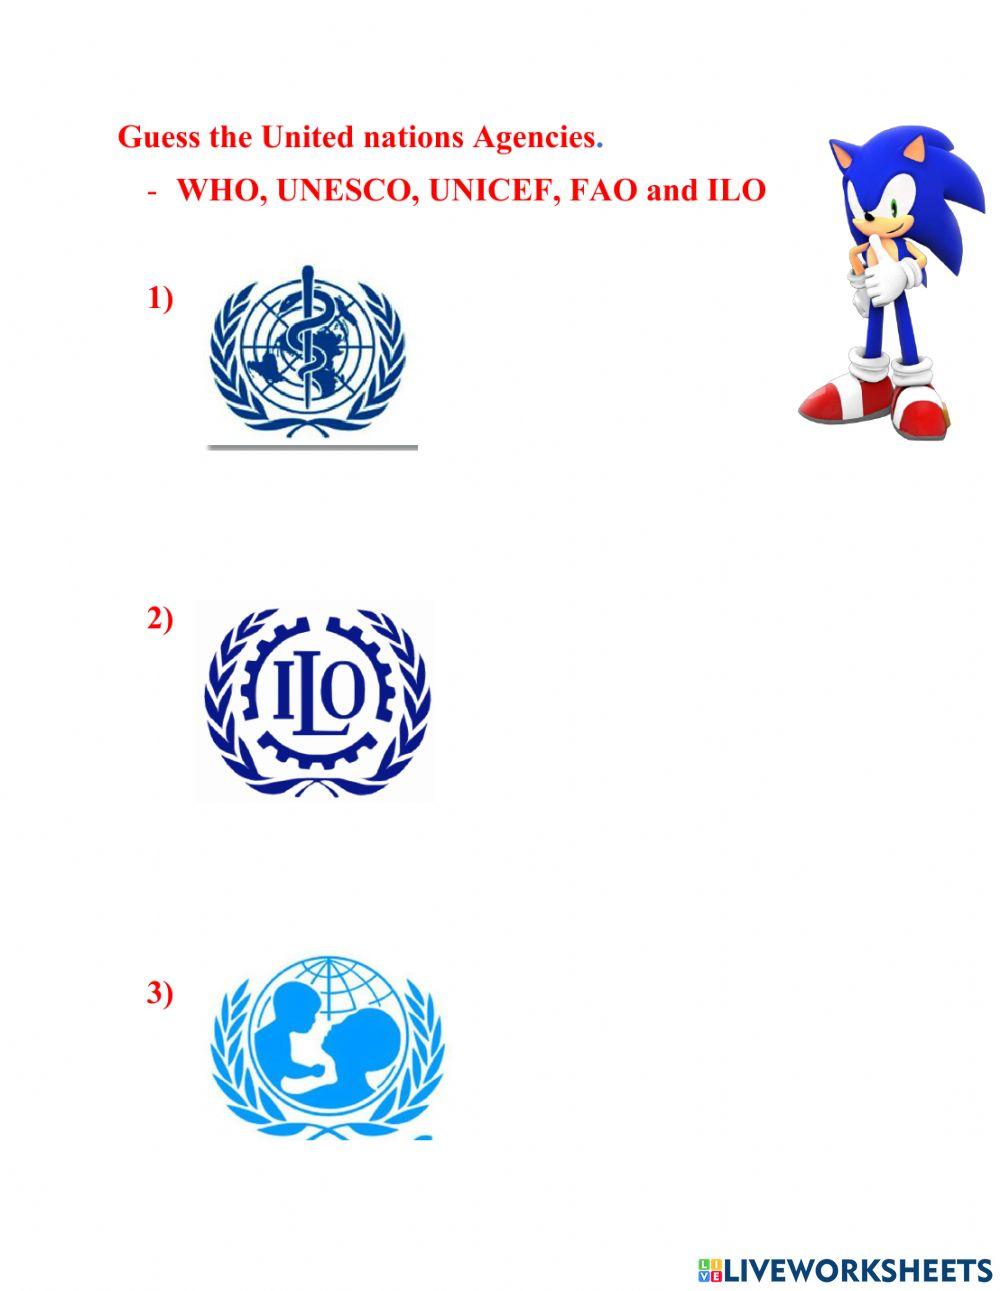 Guess the United nations Agencies